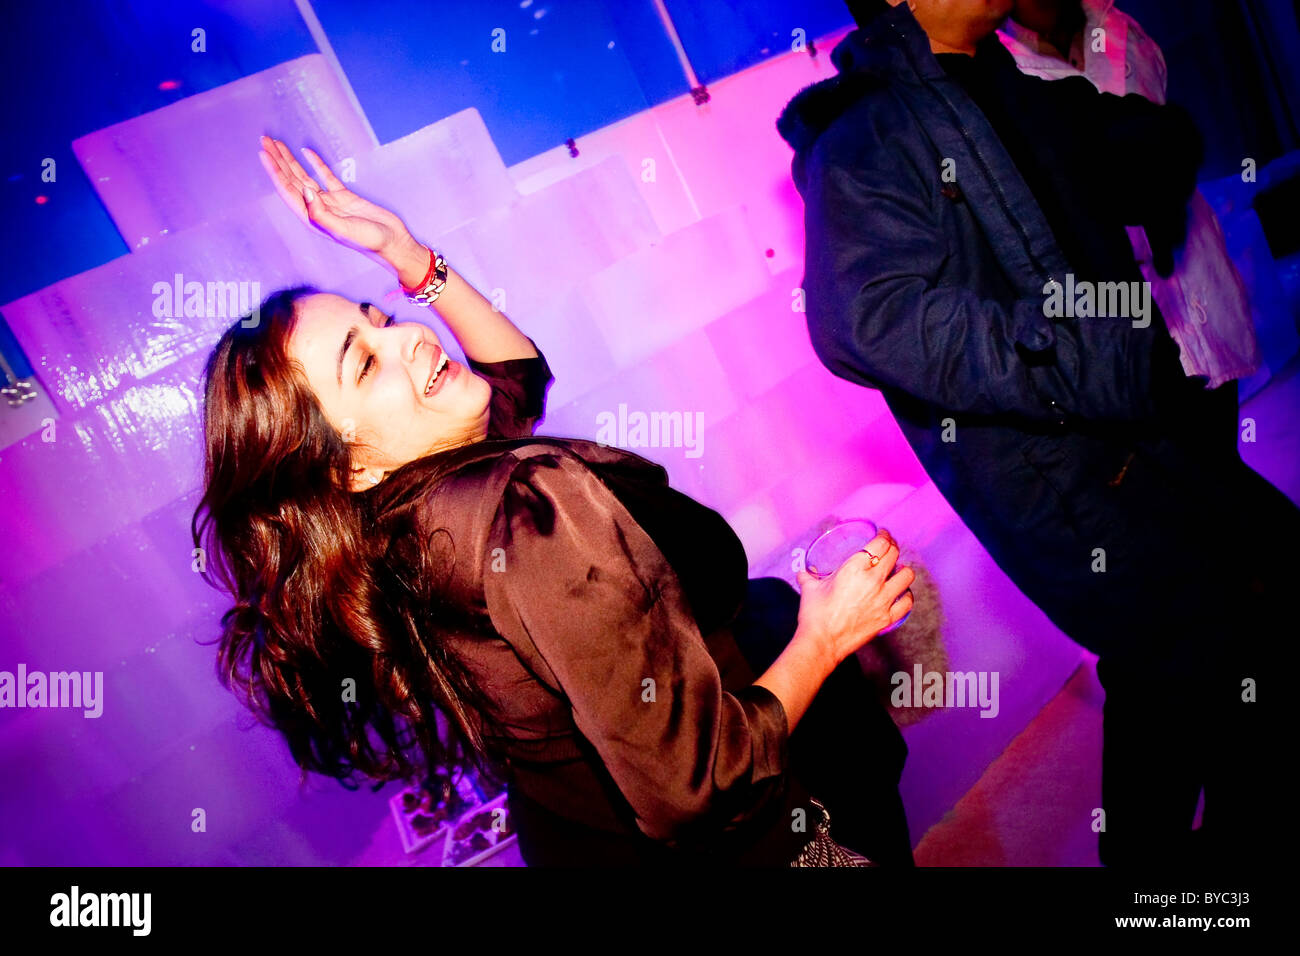 A guest dances at the nightclub 21 Fahrenheit, India's first ice bar, in Mumbai (Bombay) in India Stock Photo